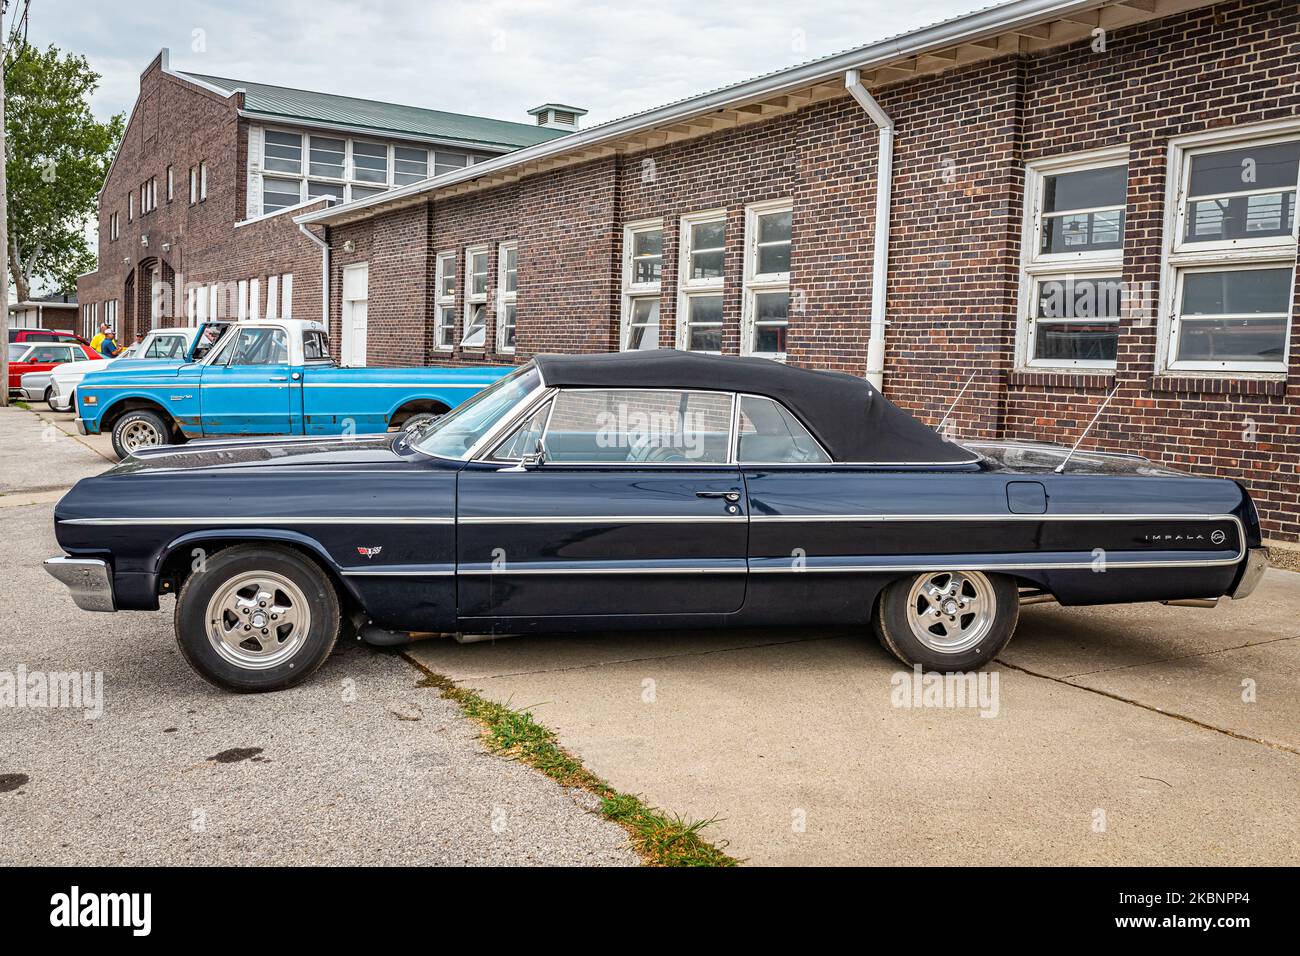 Des Moines, IA - July 01, 2022: High perspective side view of a 1964 Chevrolet Impala Convertible at a local car show. Stock Photo